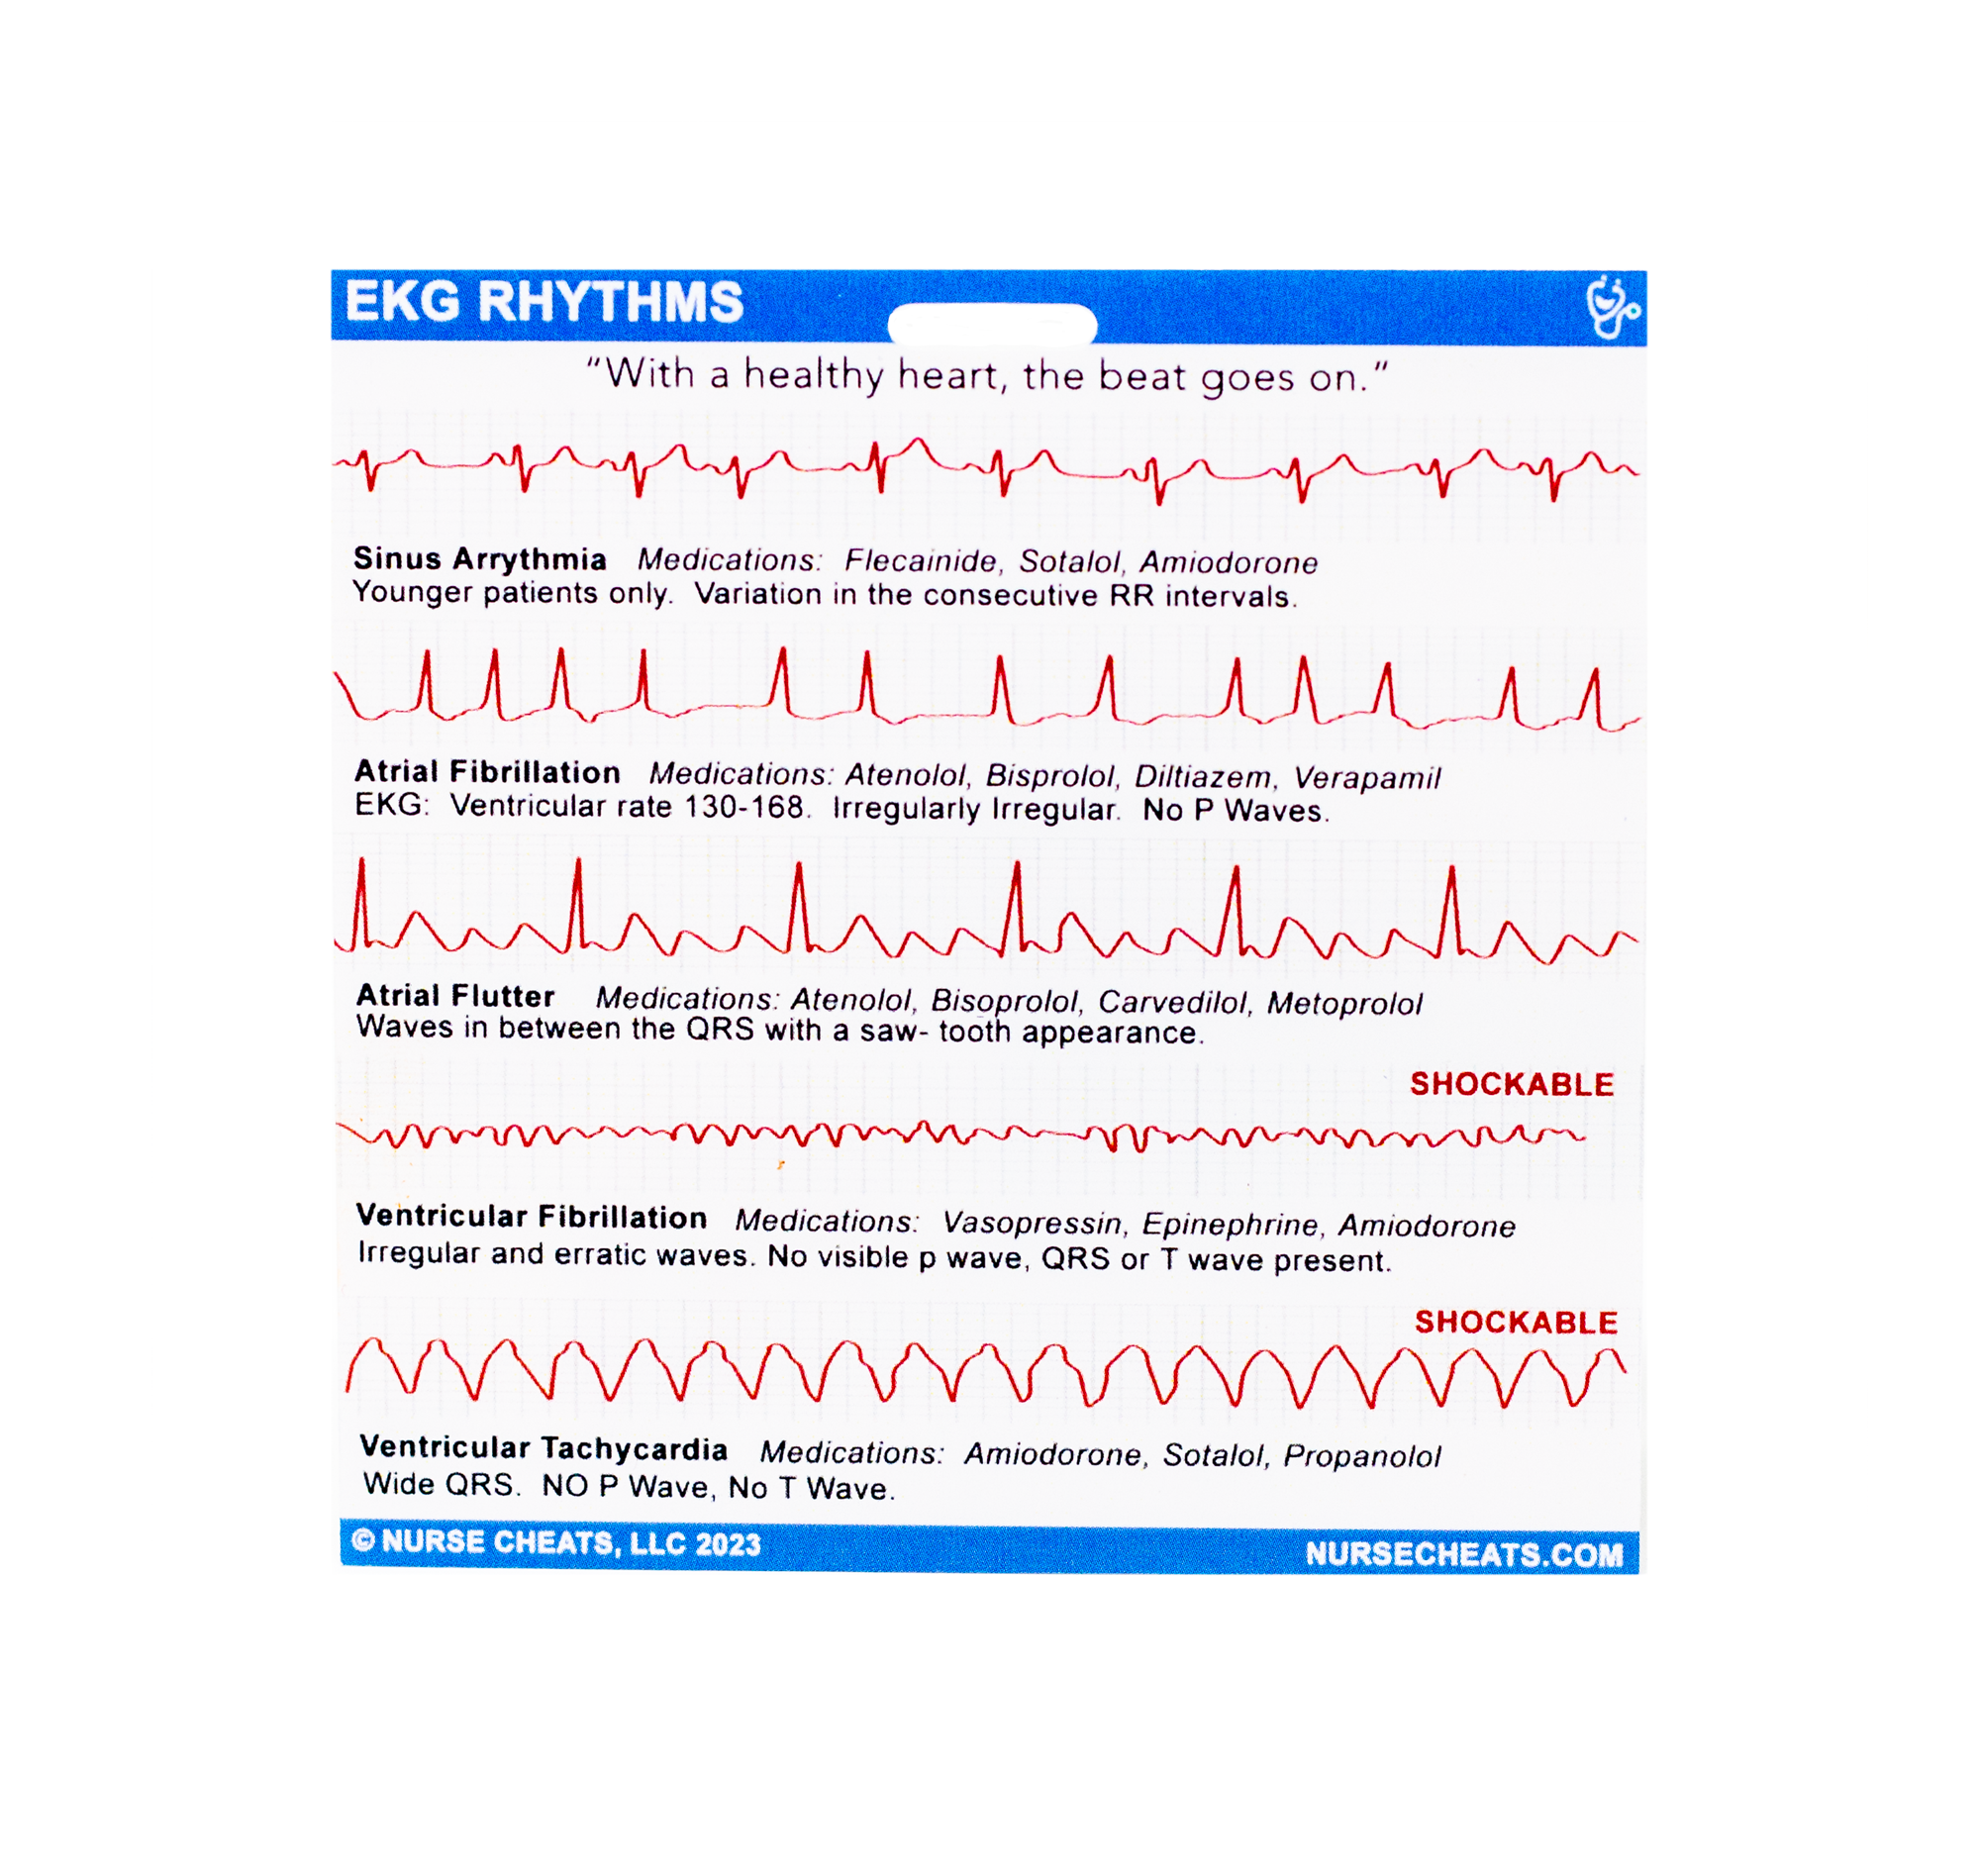 Side 1 of our EKG Badge Buddy contains EKG Heart Rhythms and more. 